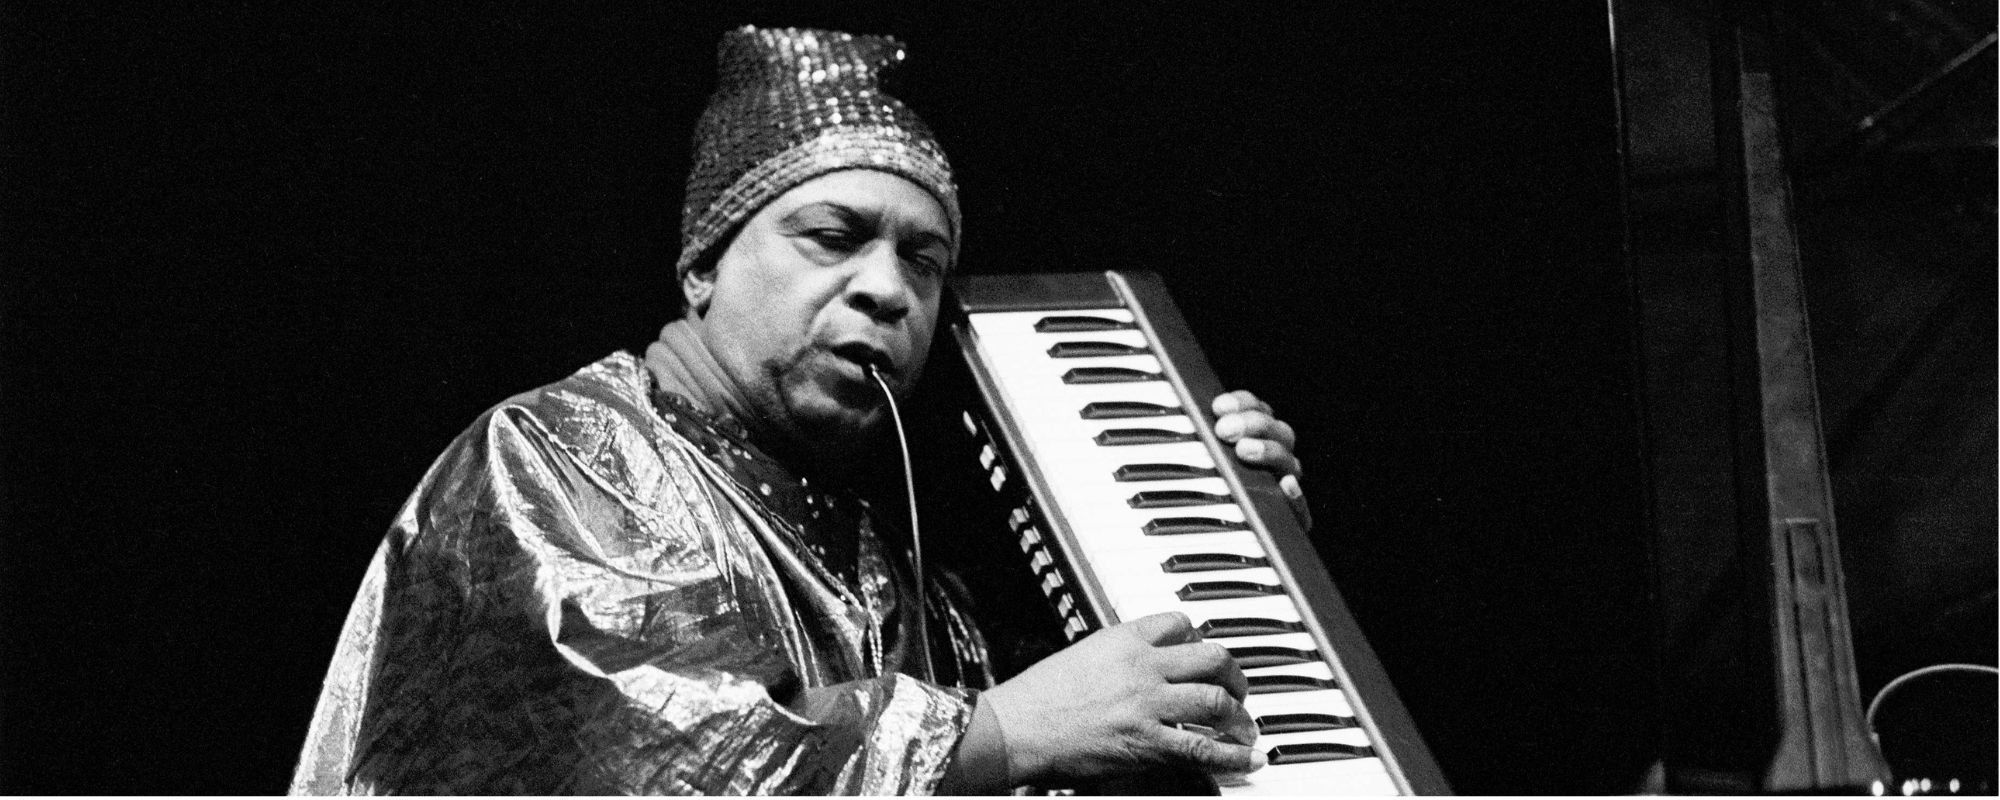 Jazz Legend Sun Ra’s Poetry to Be Celebrated with New Album